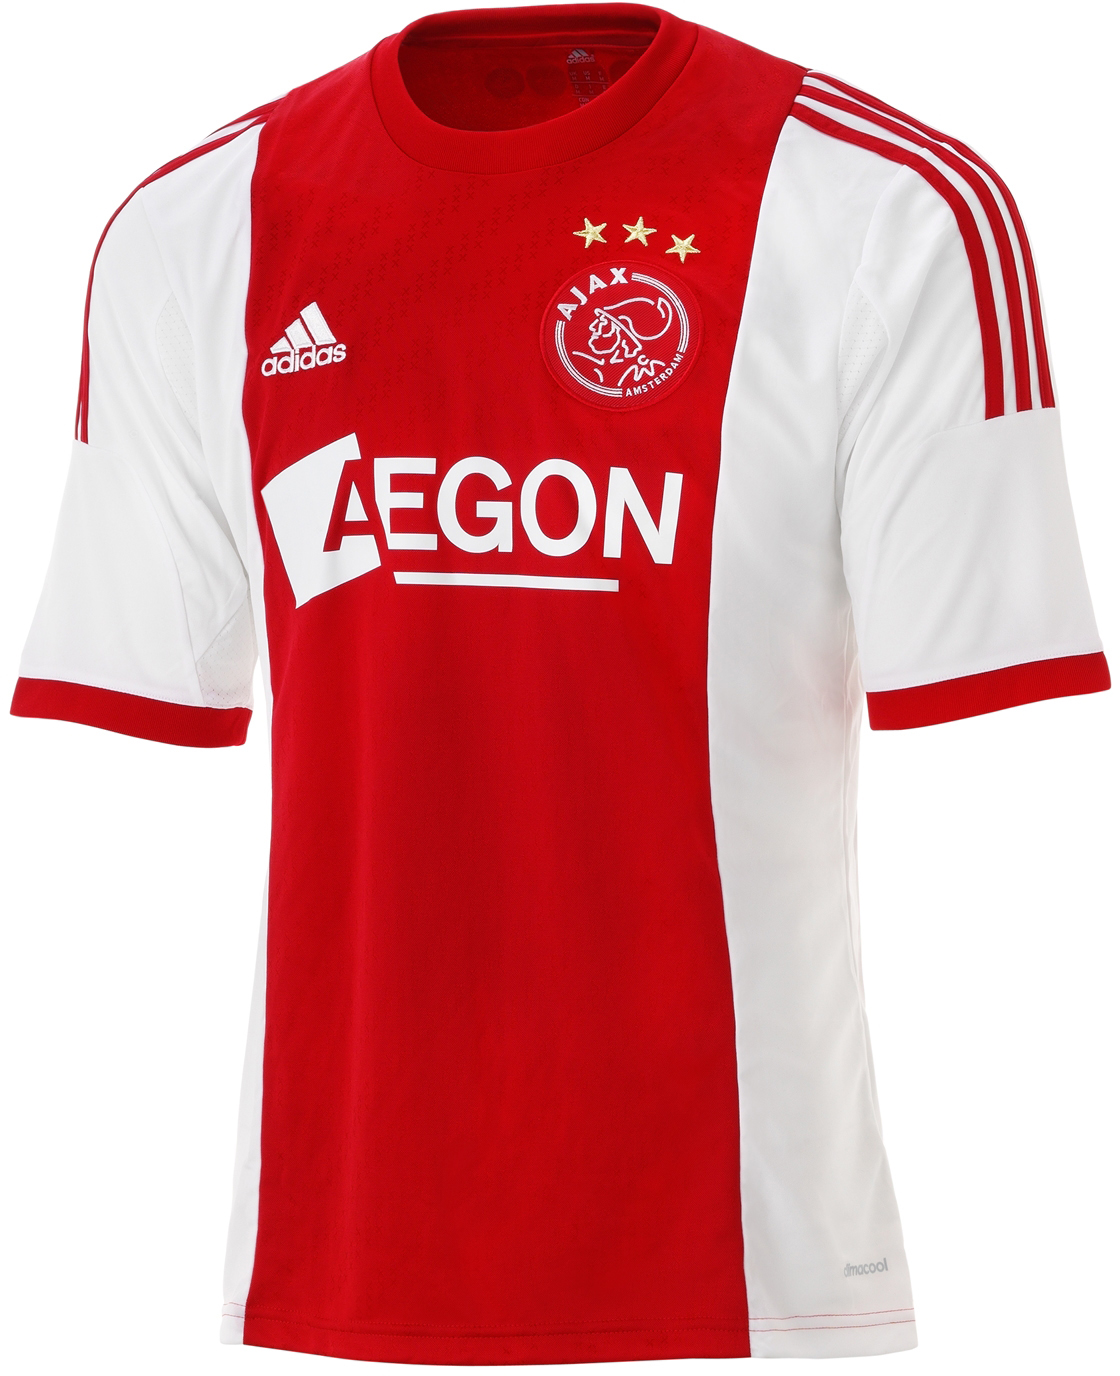 Ajax (2013-14) Home and Kits Released - Footy Headlines